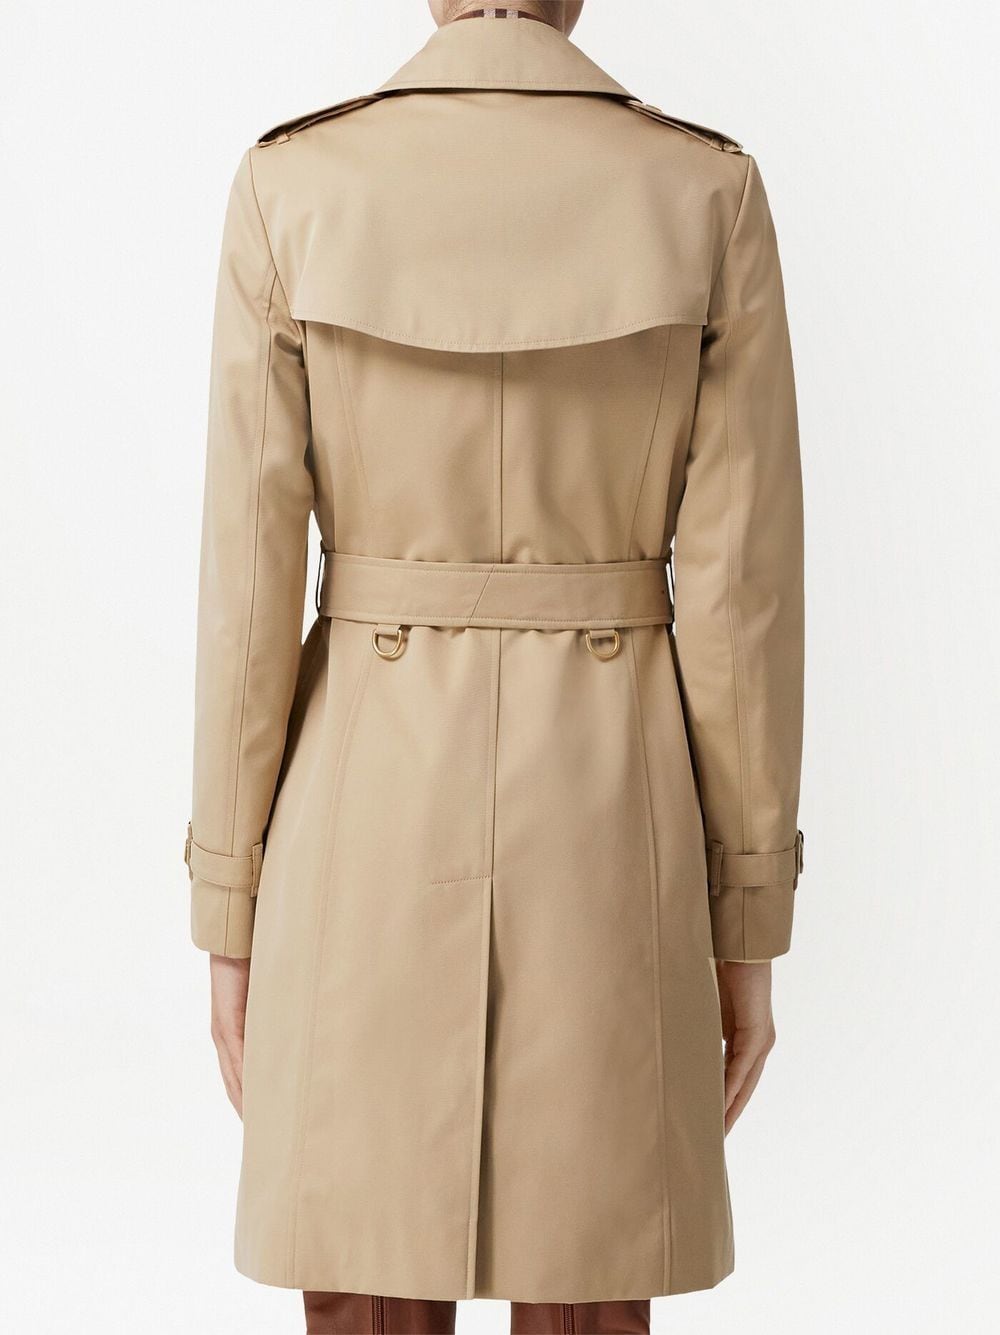 THE MID-LENGTH CHELSEA HERITAGE TRENCHCOAT